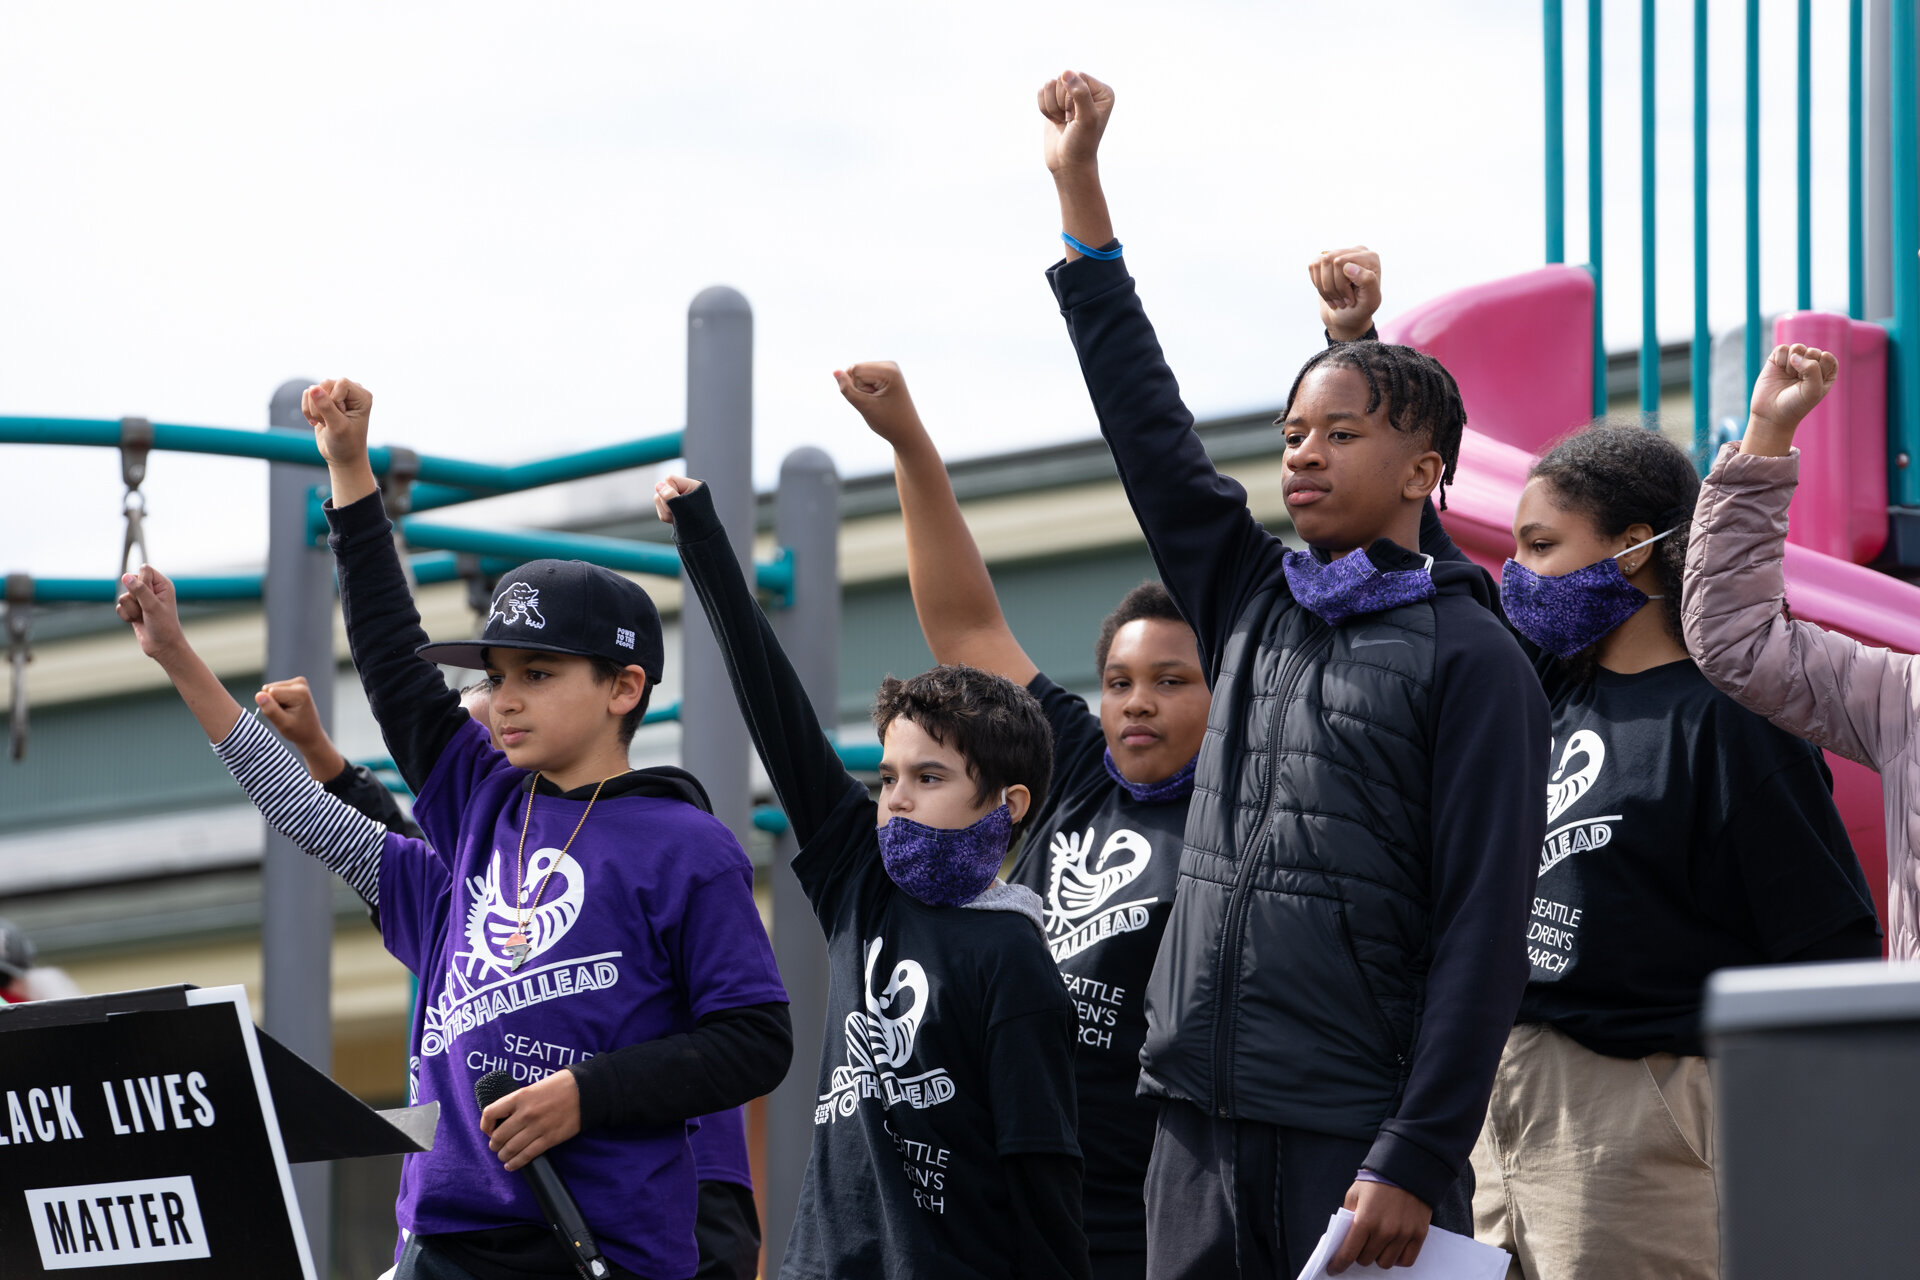  Inspired by the 1963 Birmingham Children’s March, thousands of Seattle youth raised their voices and took to the streets on June 13, 2020 